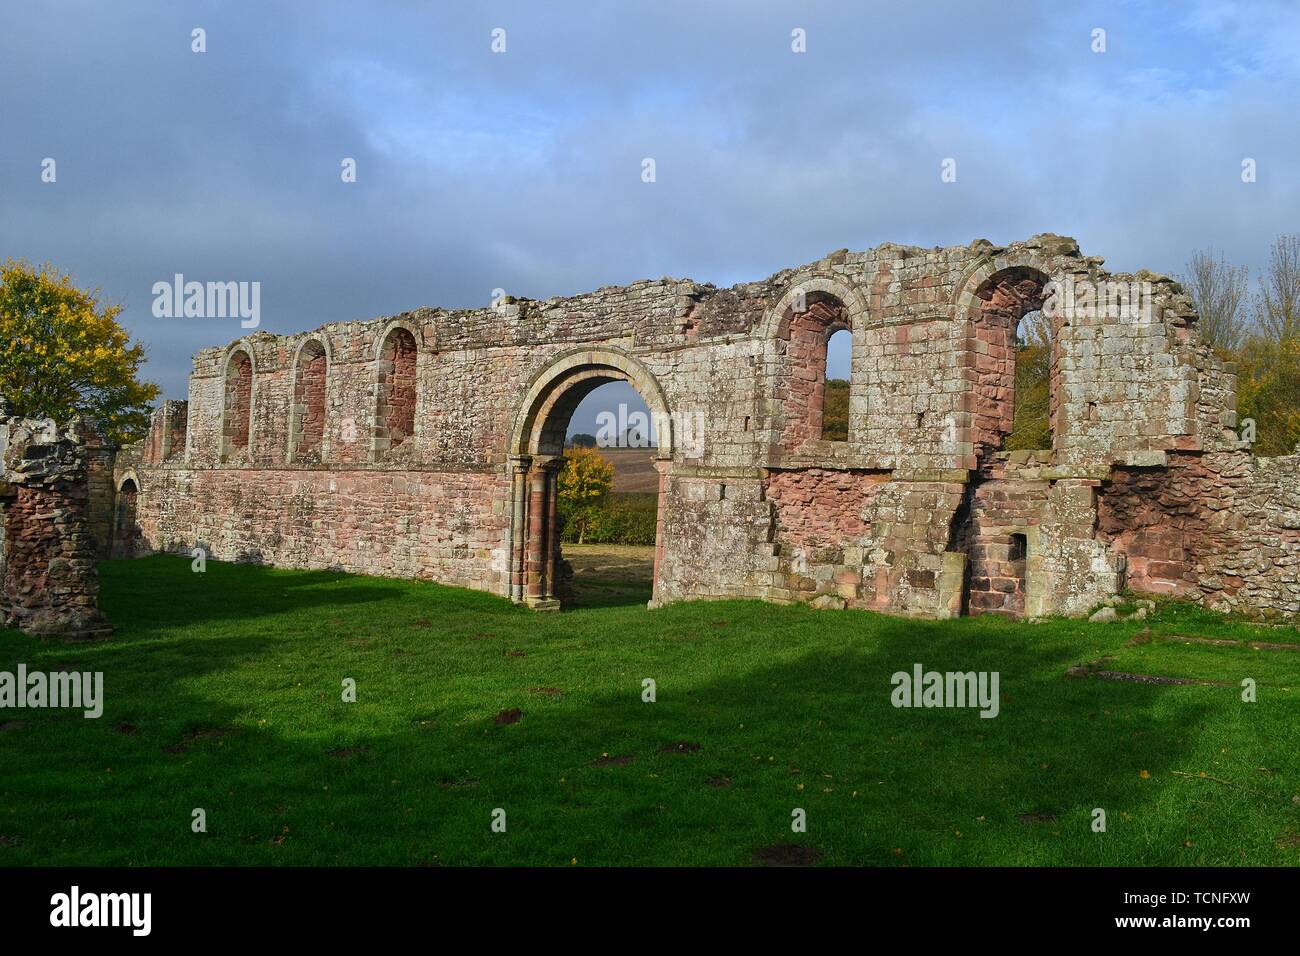 Ruins of the White Lady's Priory, at Boscabel House and the Royal Oak, Brewood, Bishop's Wood, Shropshire, UK Stock Photo